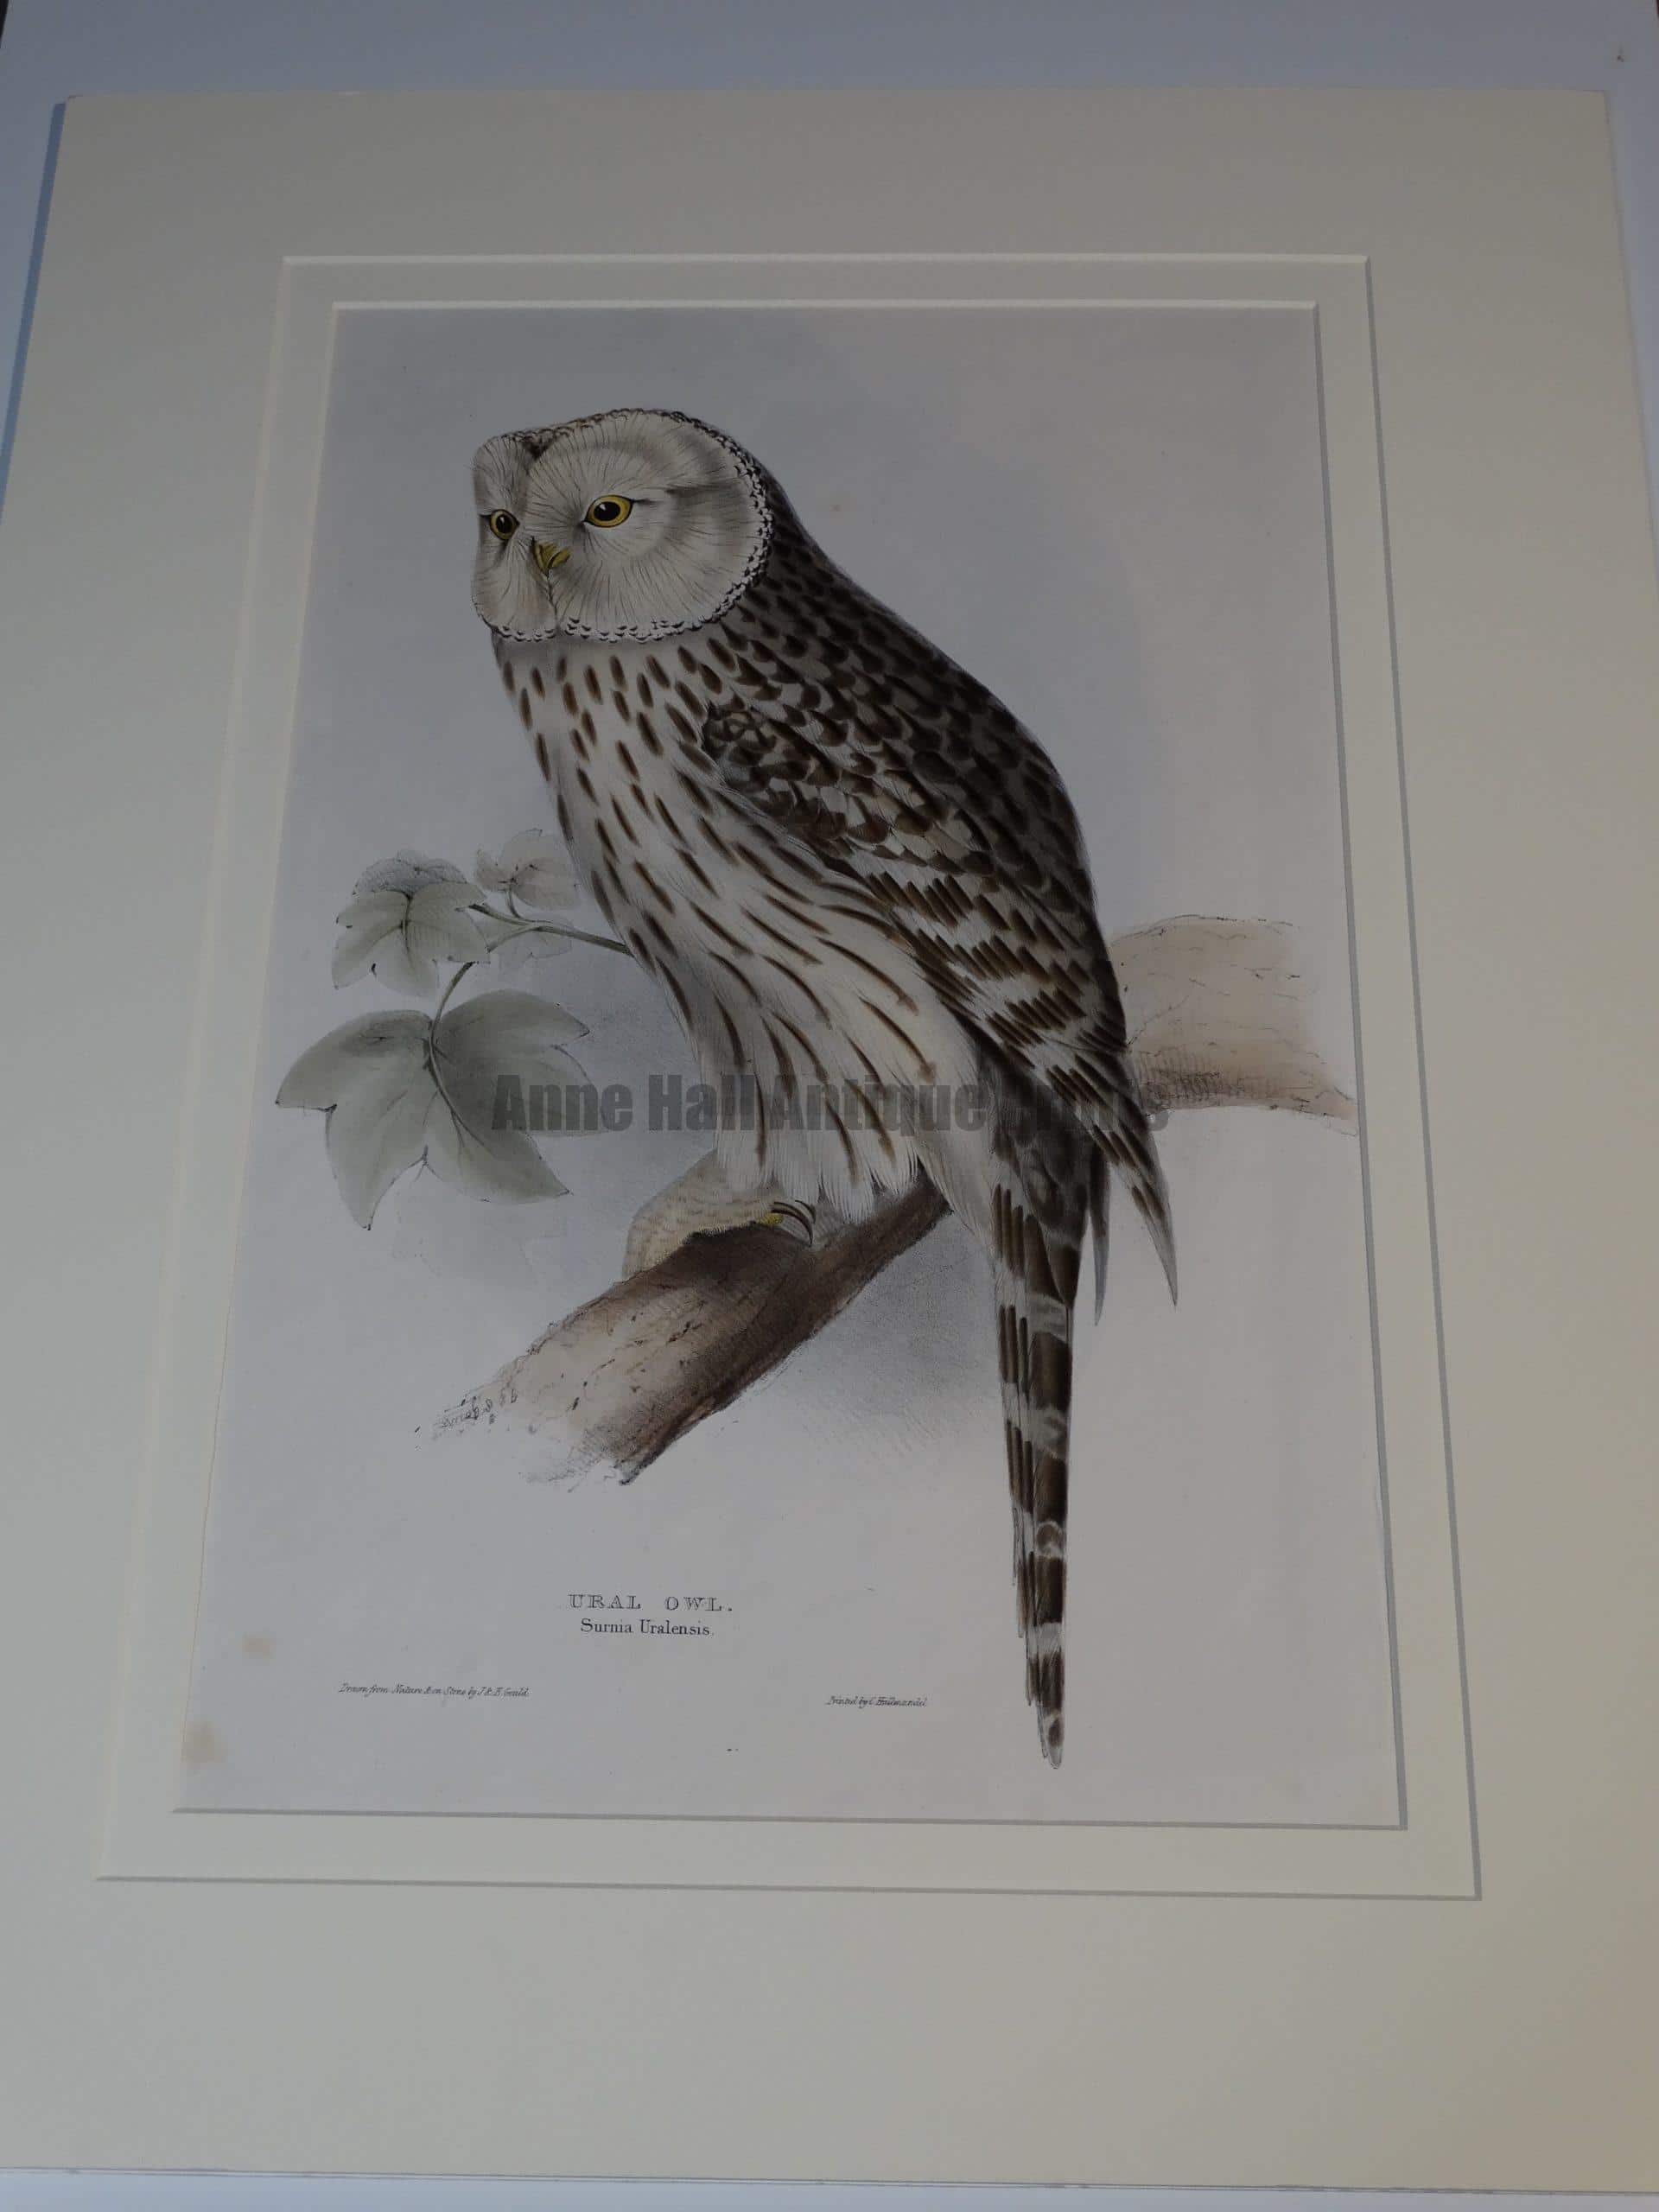 Stunning depictionUral Owl watercolor lithograph by John Gould. Anne Hall Antique Prints only handle, original Gould Birds. Our prints are almost 150 years old.